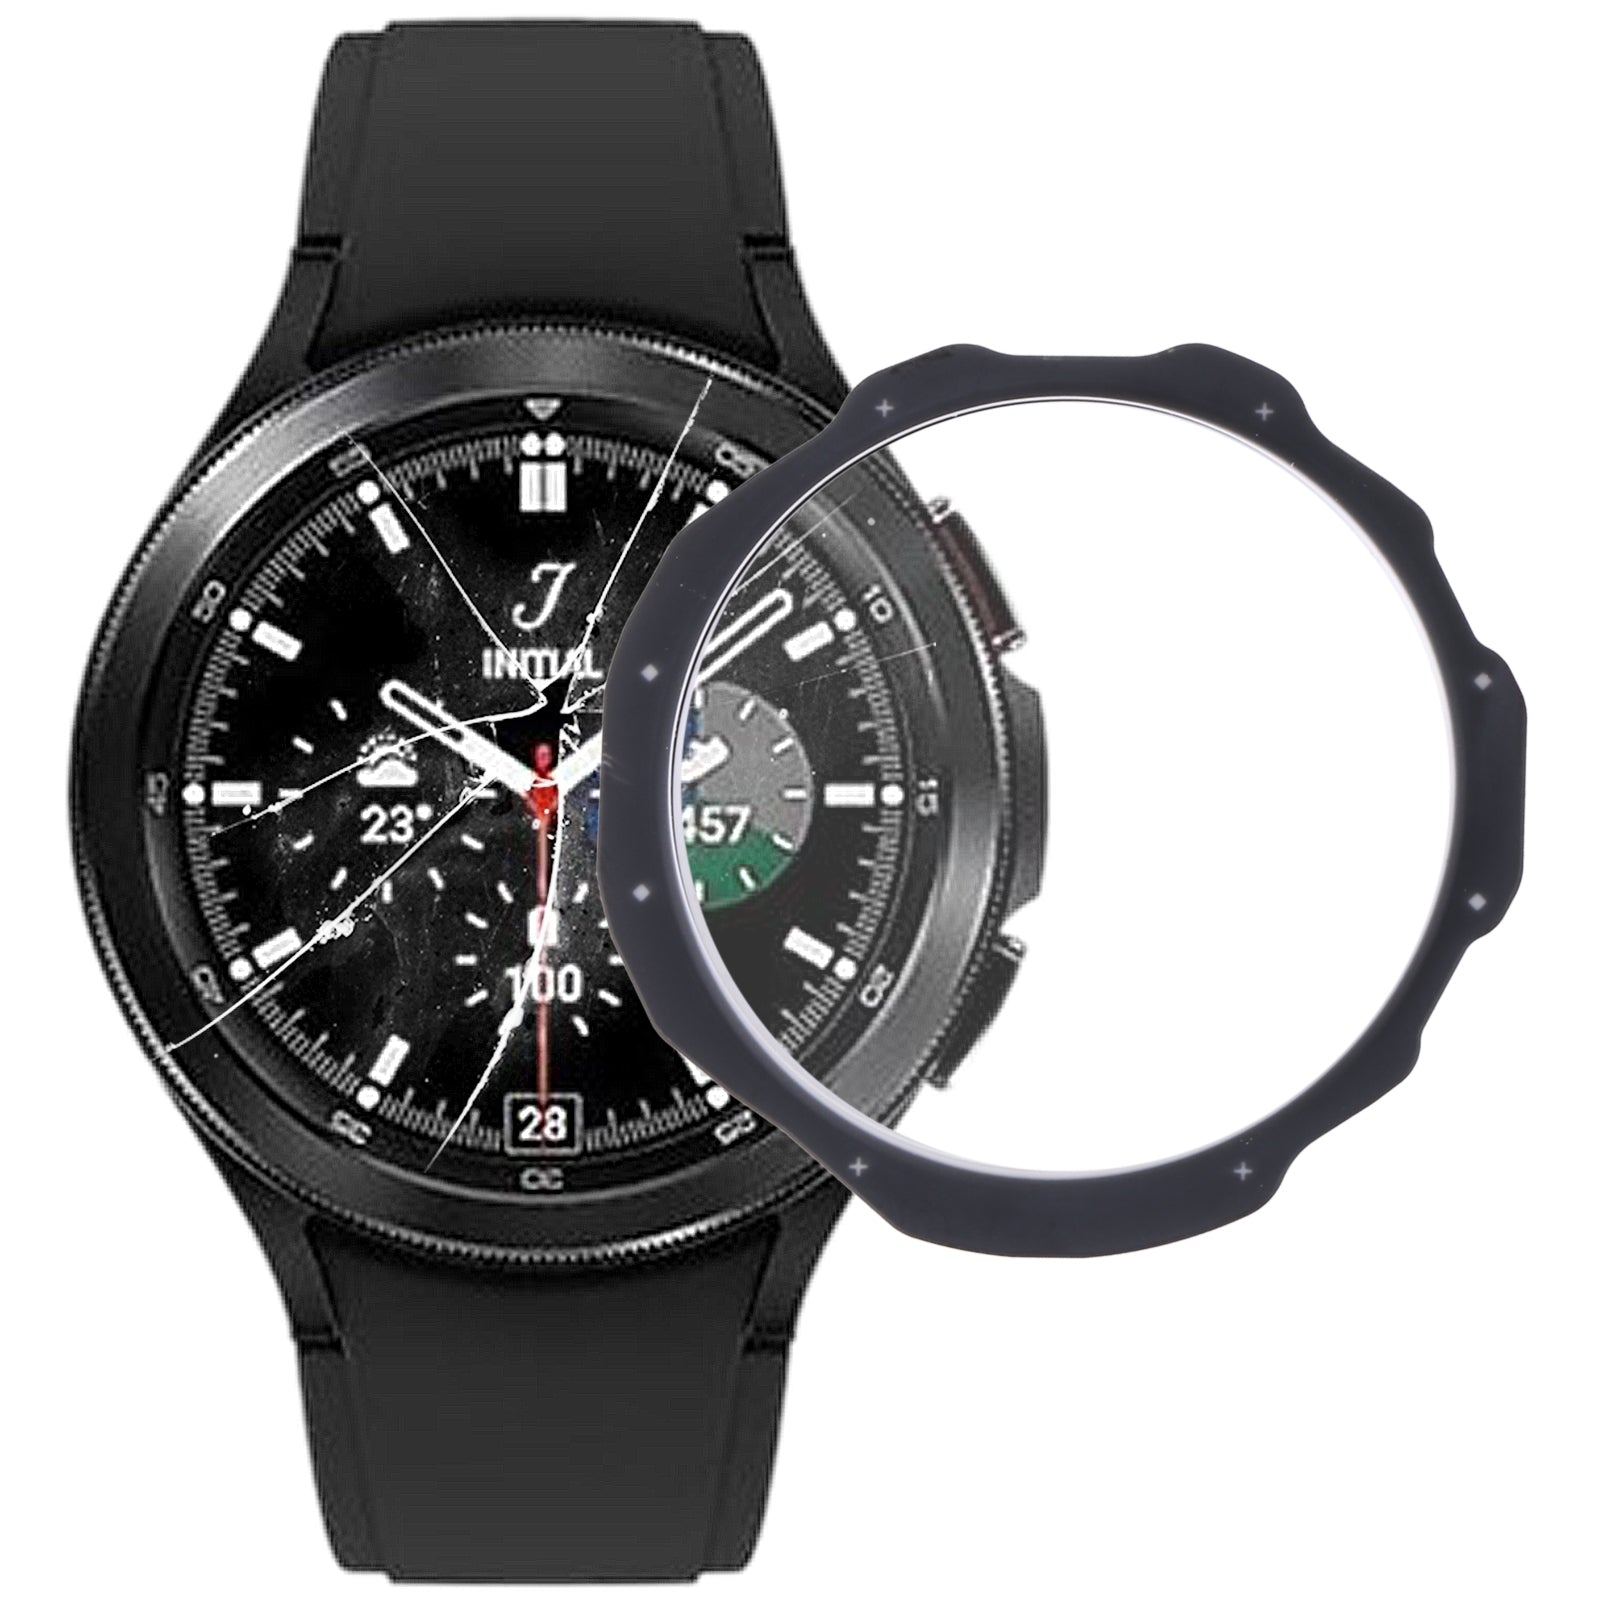 Outer Glass Front Screen Samsung Galaxy Watch 4 Classic 42mm R880 Black